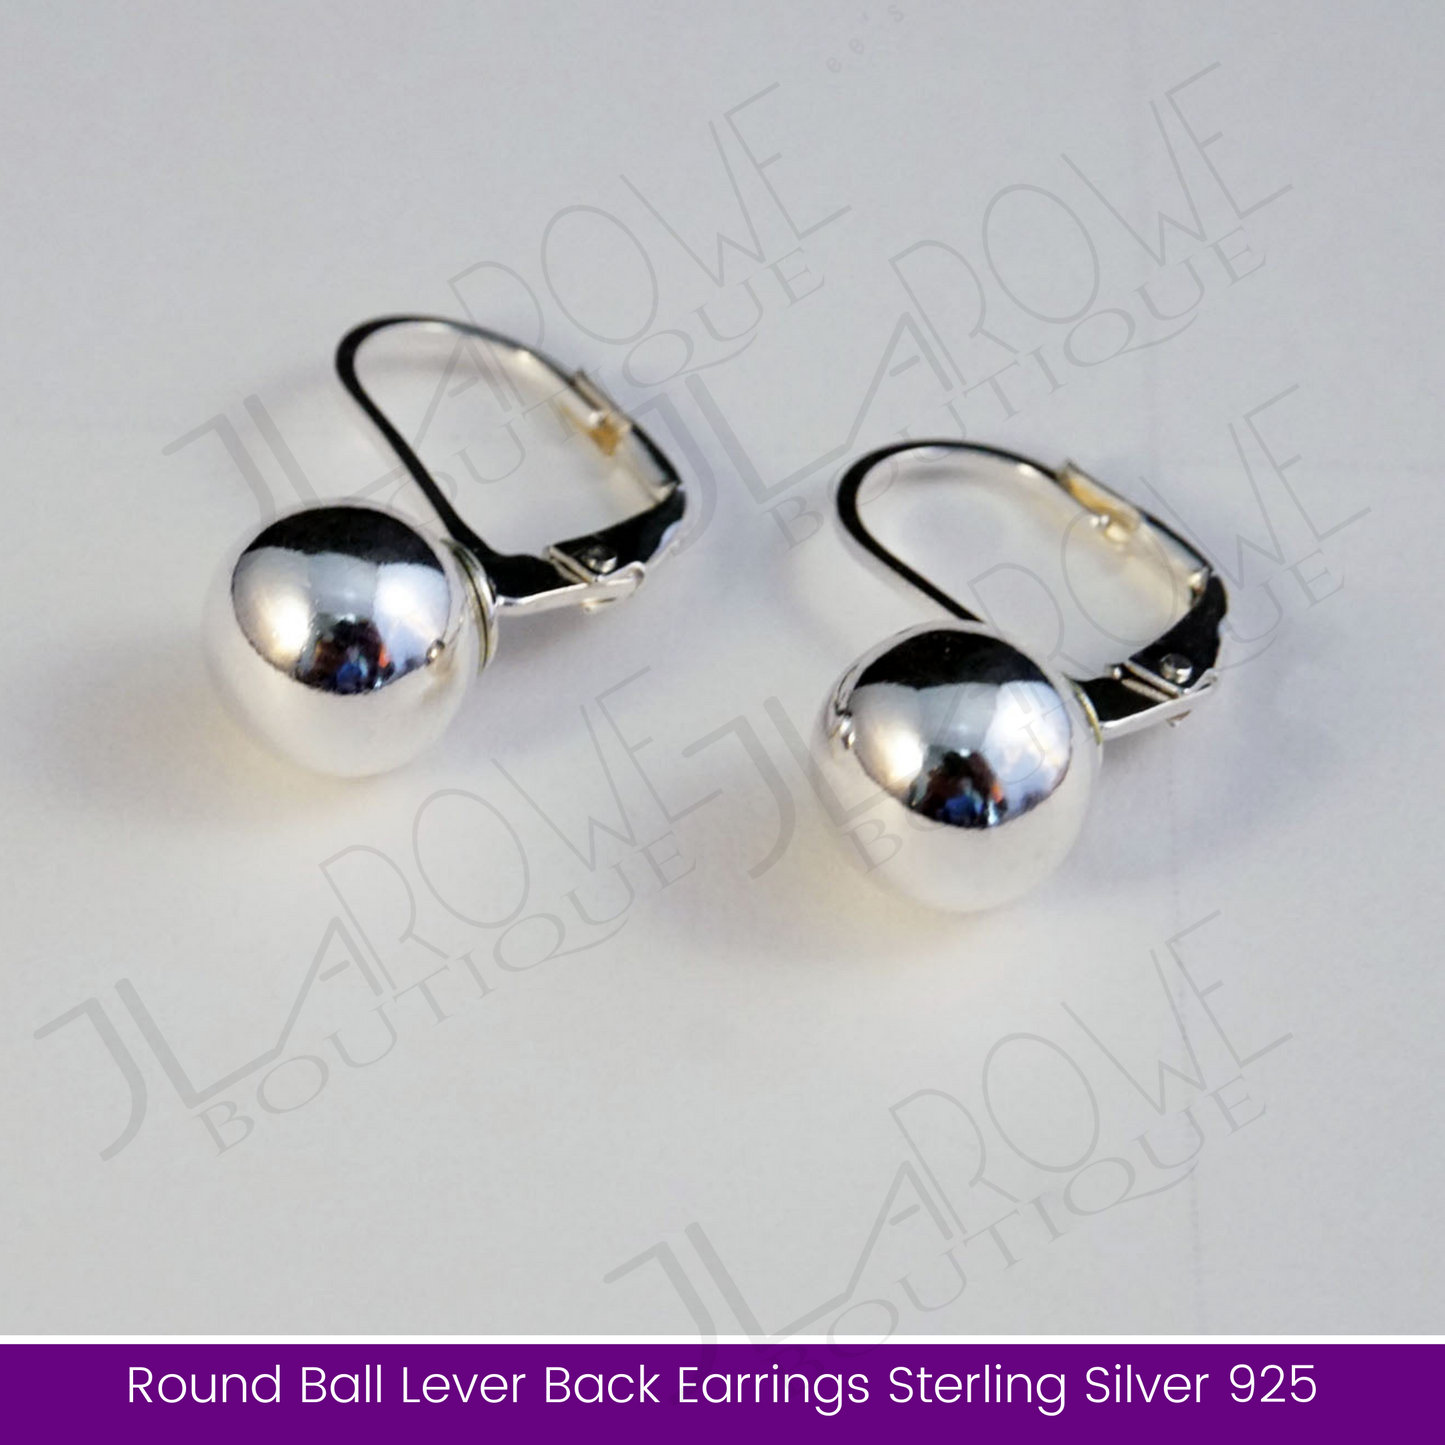 Round Ball Lever Back Earrings Sterling Silver 925 (Limited Stock)